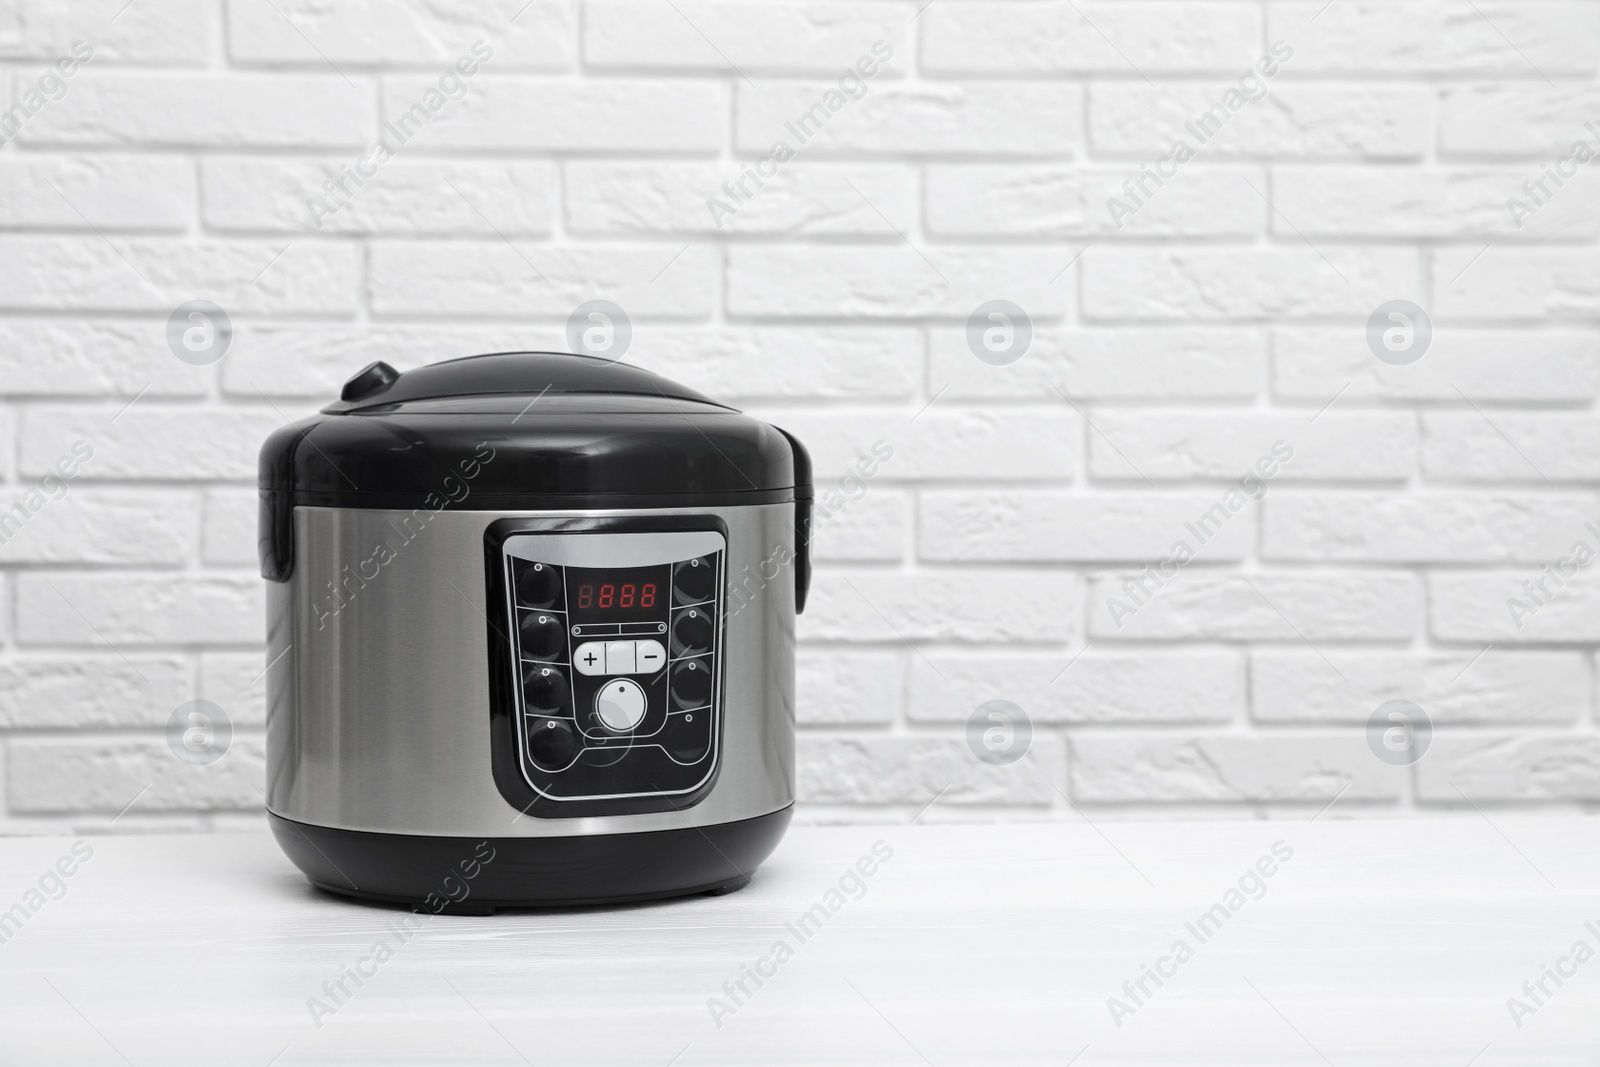 Photo of Modern electric multi cooker on table near brick wall. Space for text